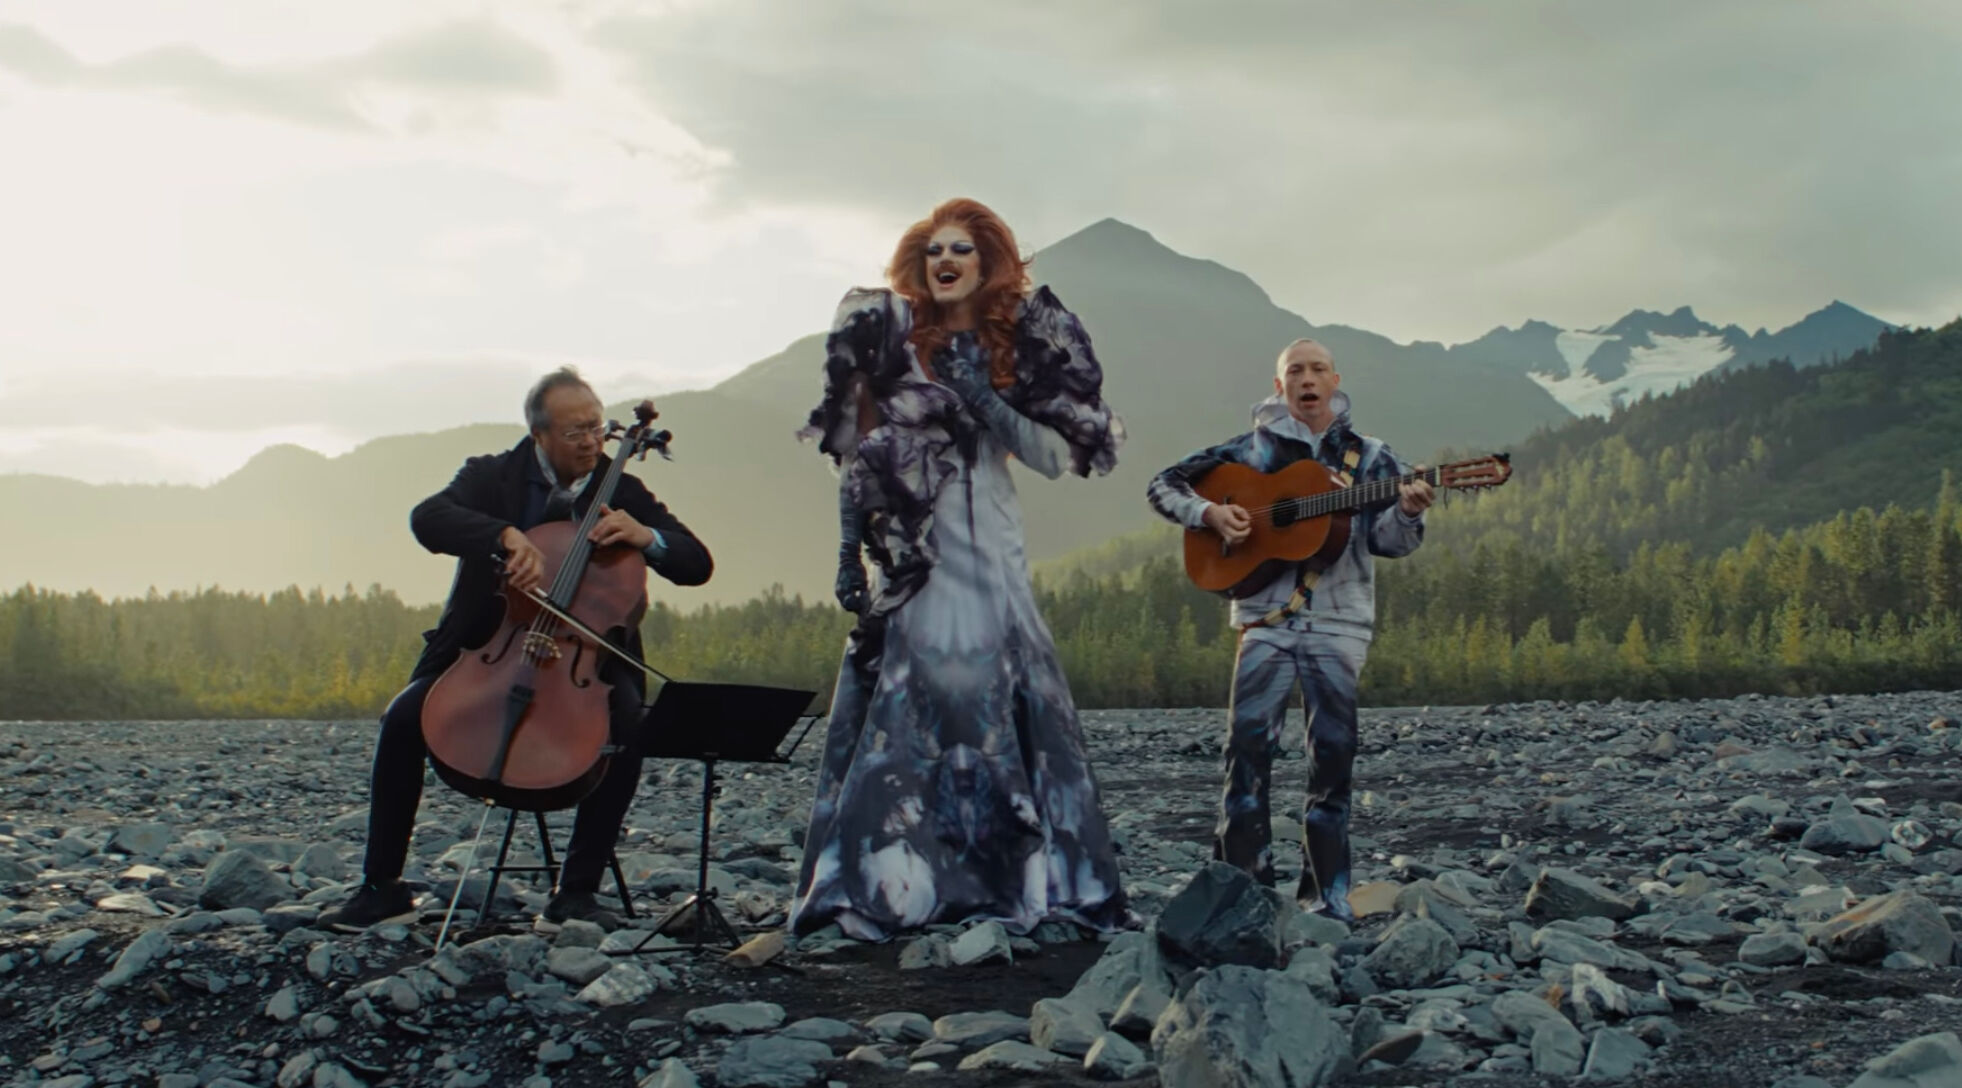 From left: Yo-Yo Ma, Pattie Gonia, and Quinn Christopherson in the video for "Won't Give Up"